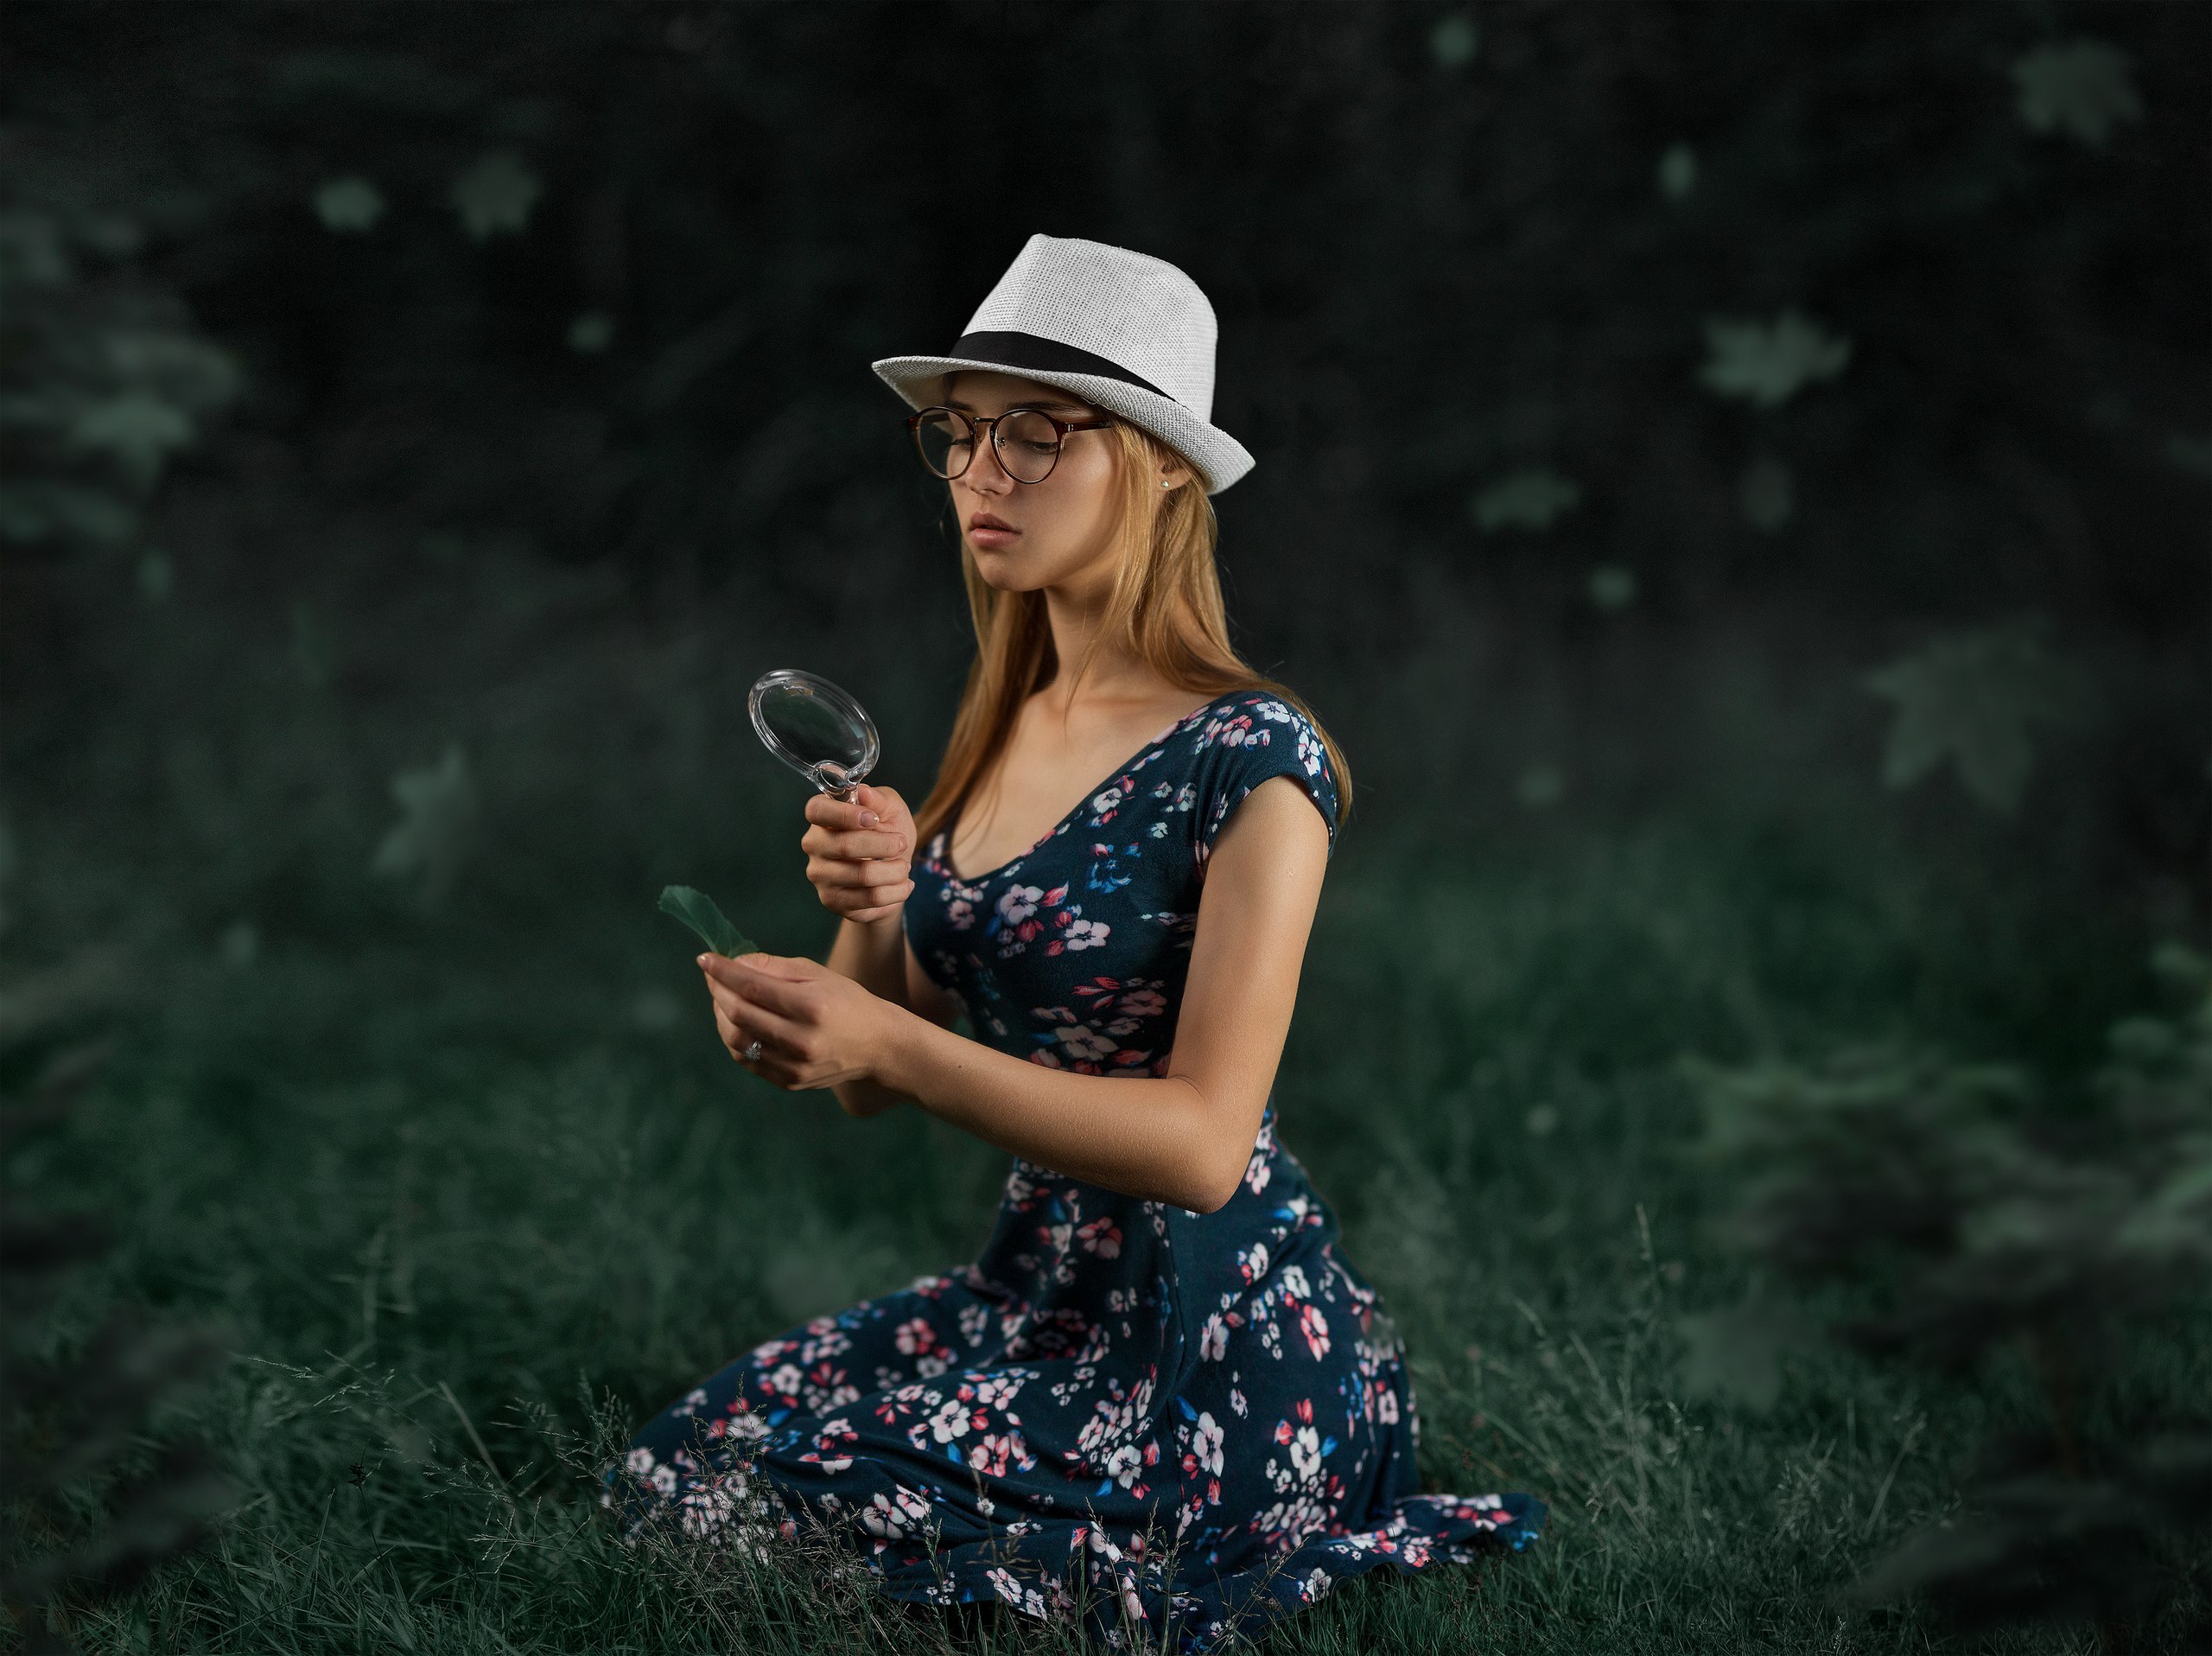 Women Blonde Dress Hat Women With Glasses Magnifying Glass Leaves Women Outdoors Valeria Anataichuk  2560x1916